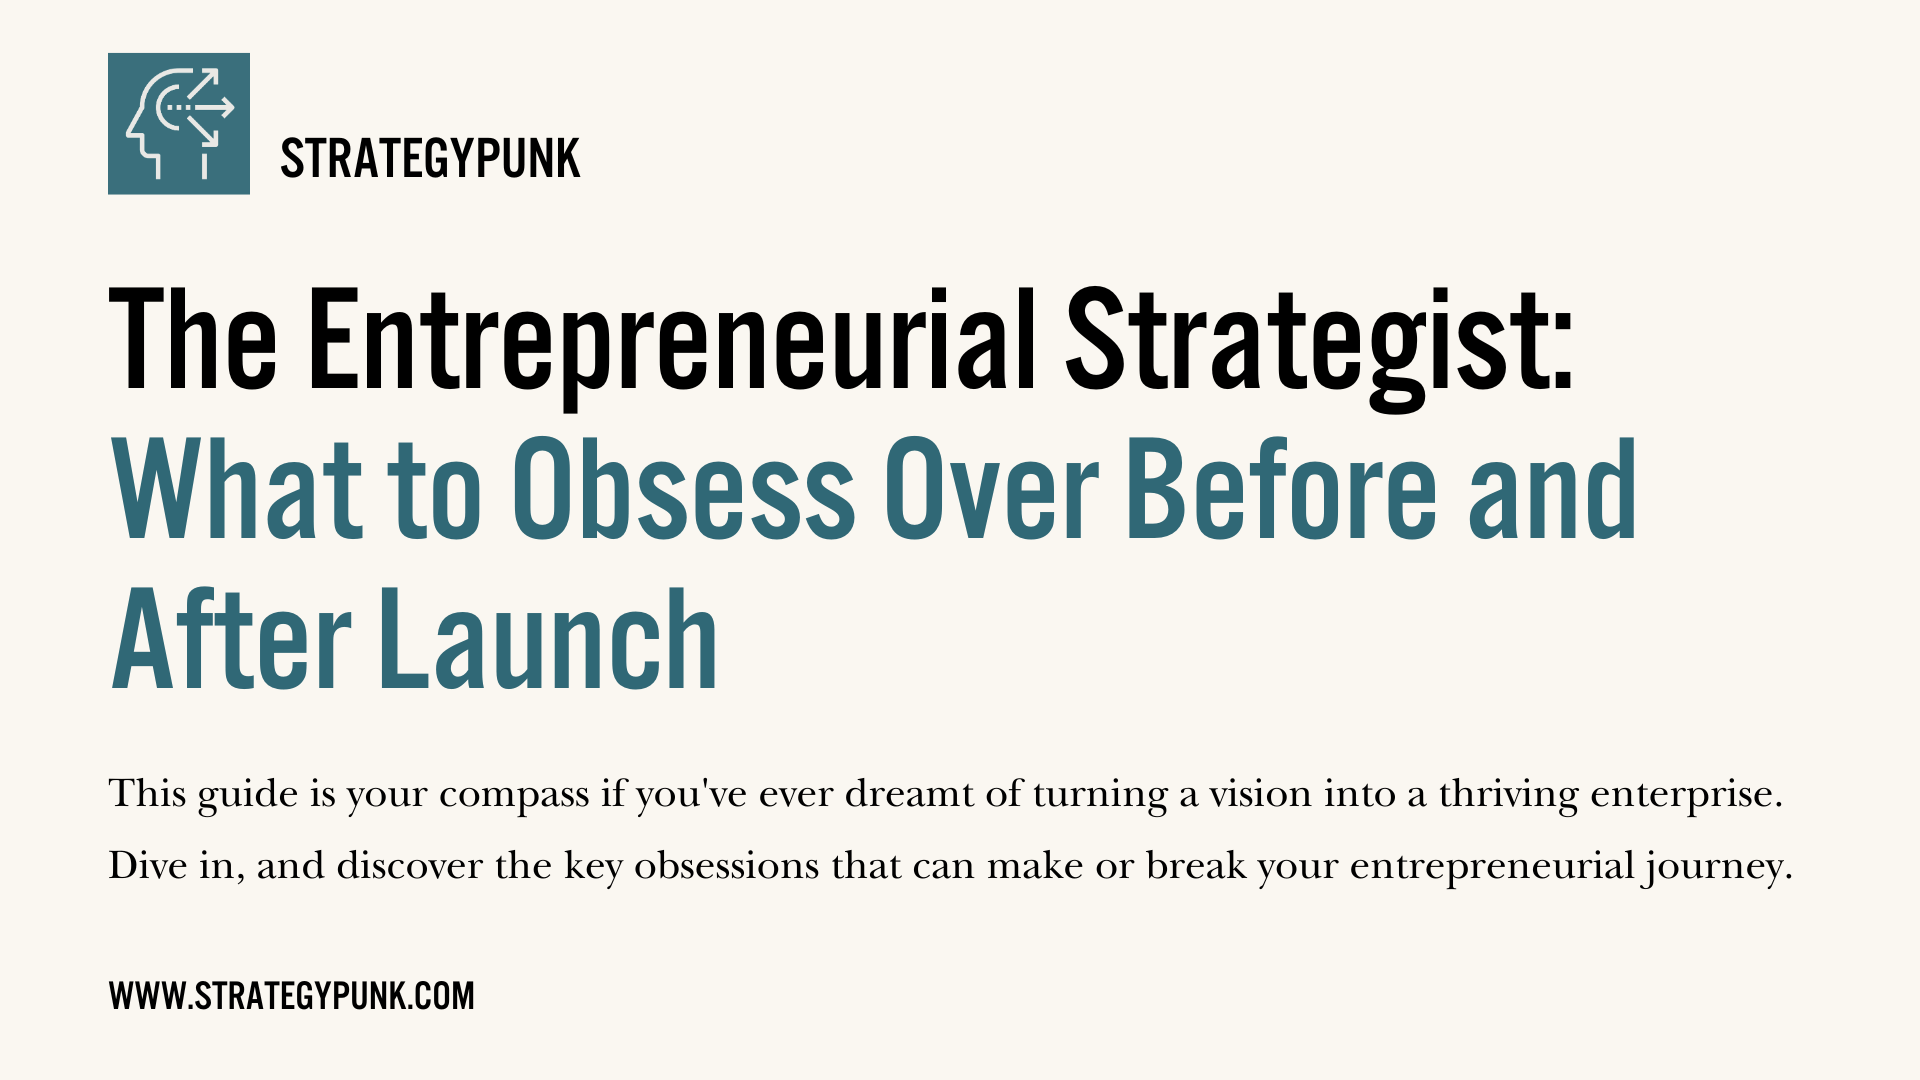 The Entrepreneurial Strategist: What to Obsess Over Before and After Launch